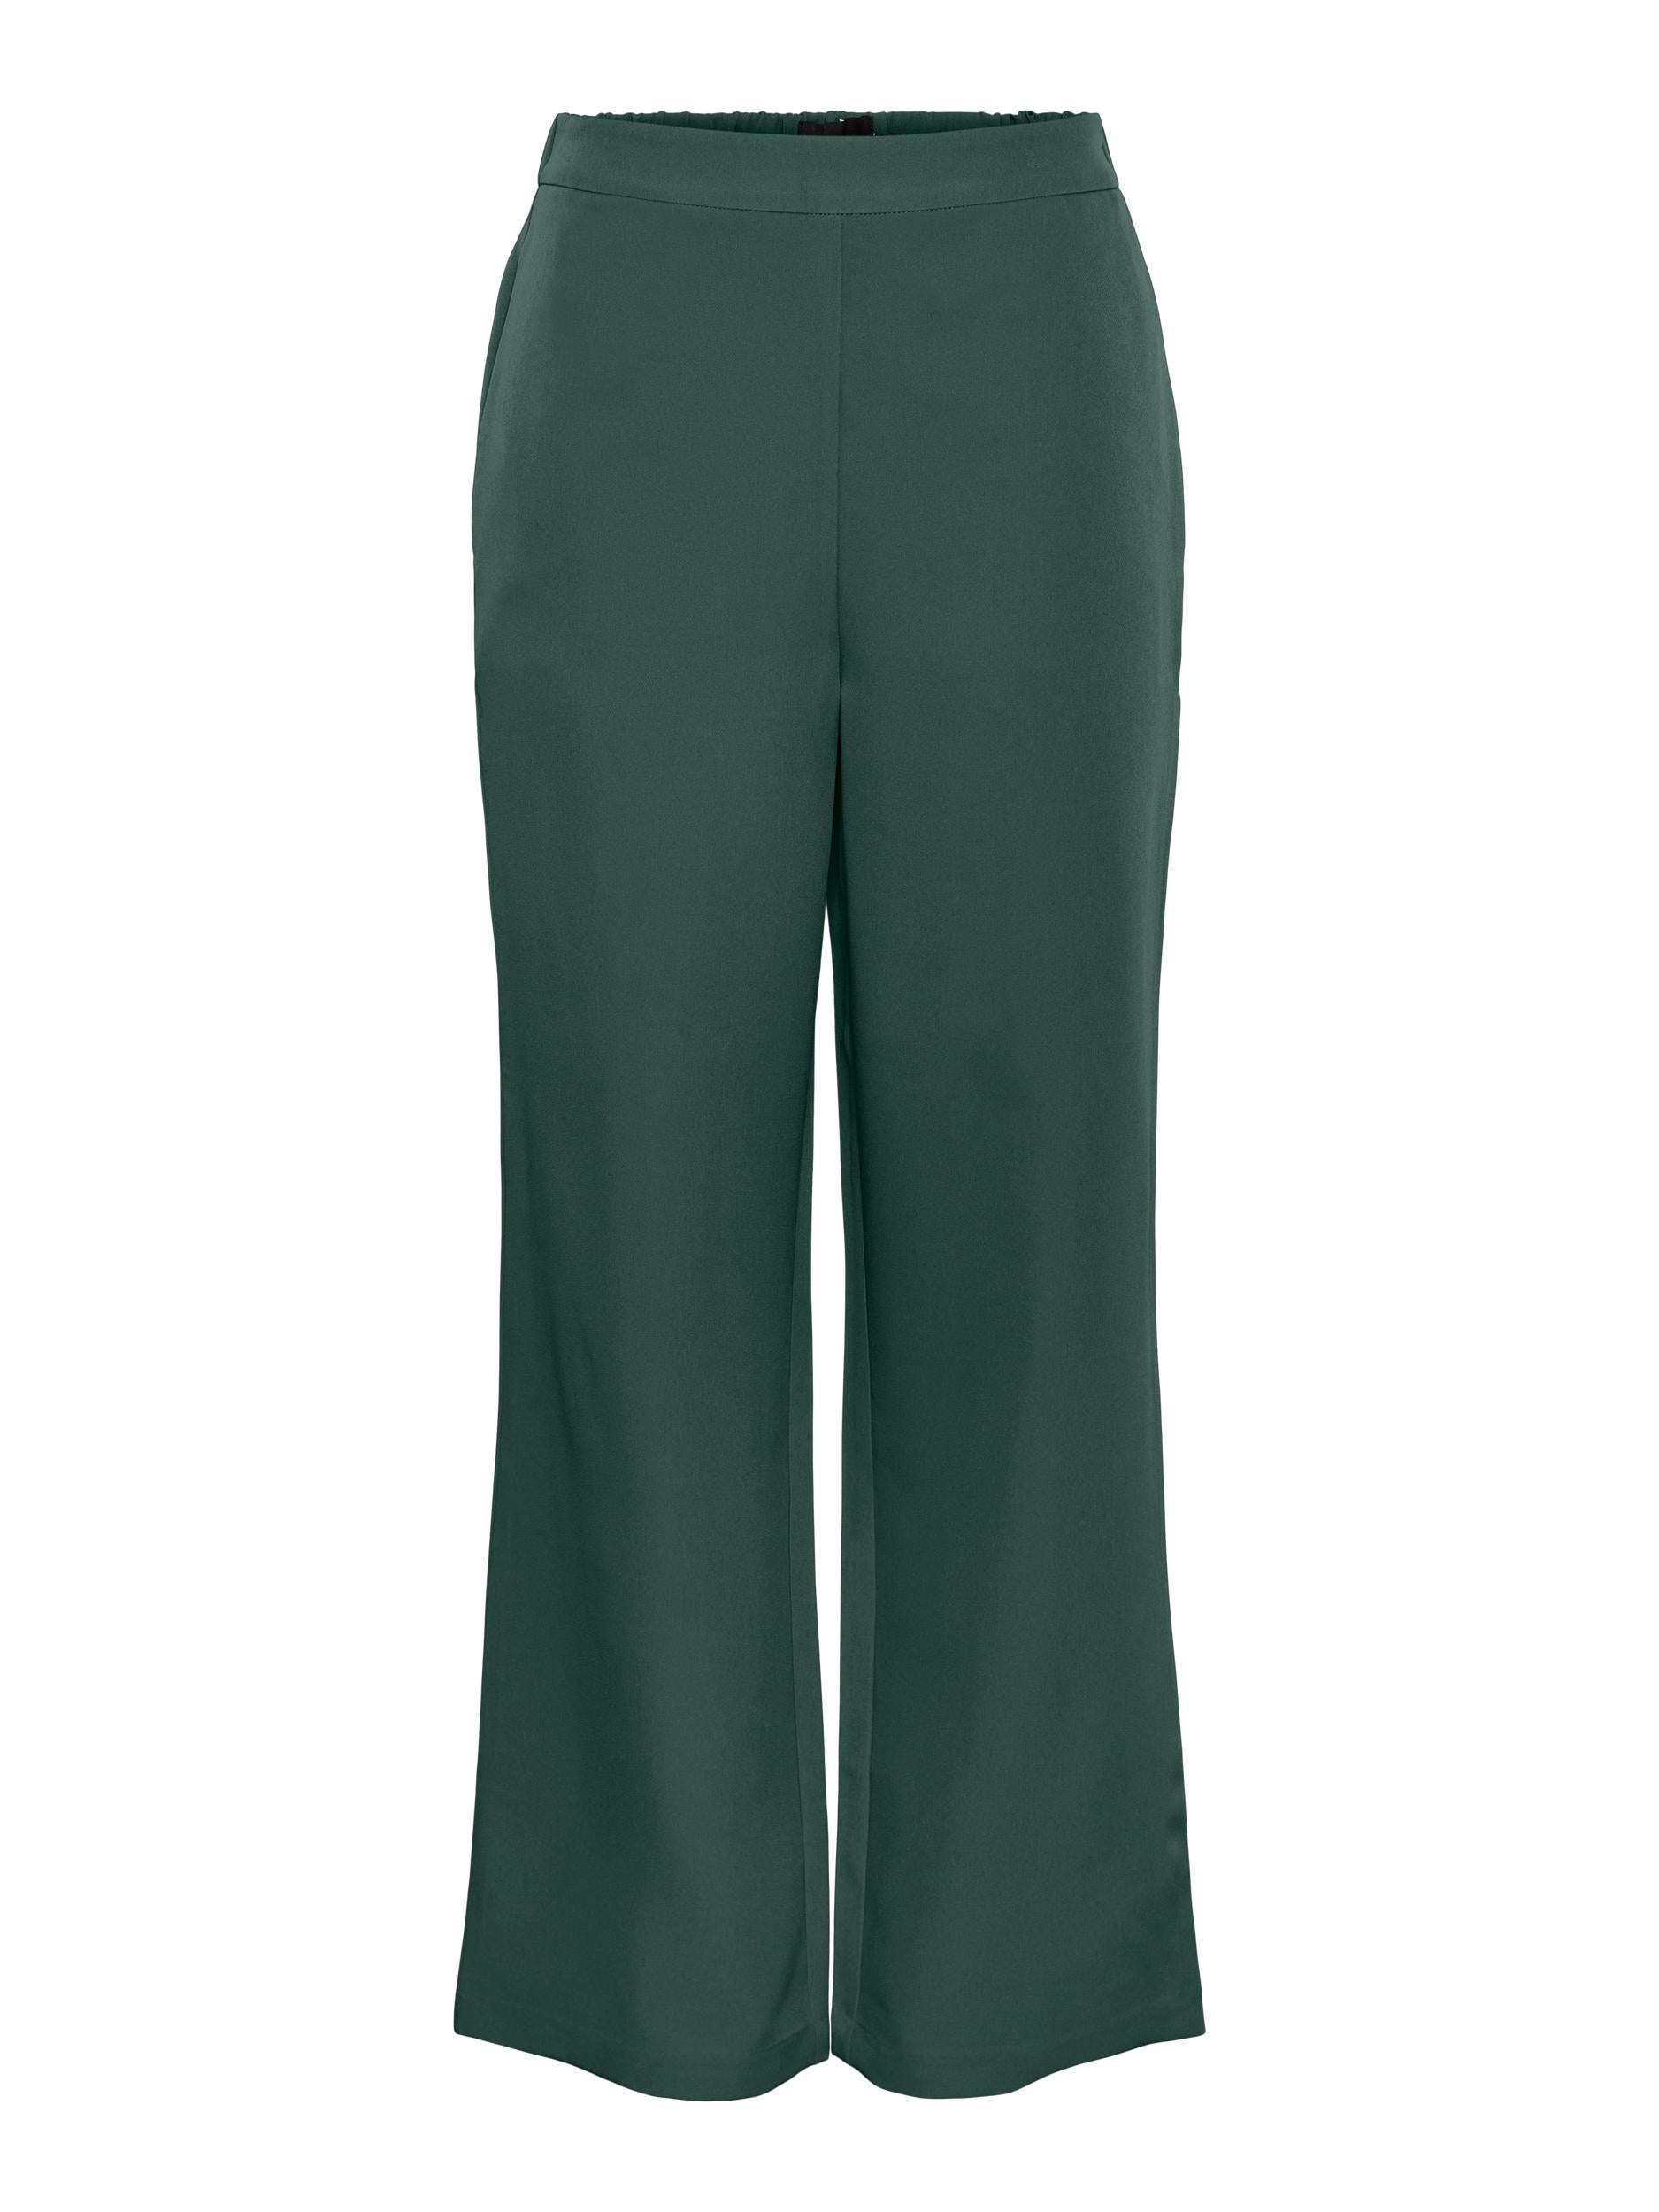 Pieces Bossy wide pants - Forrest Green